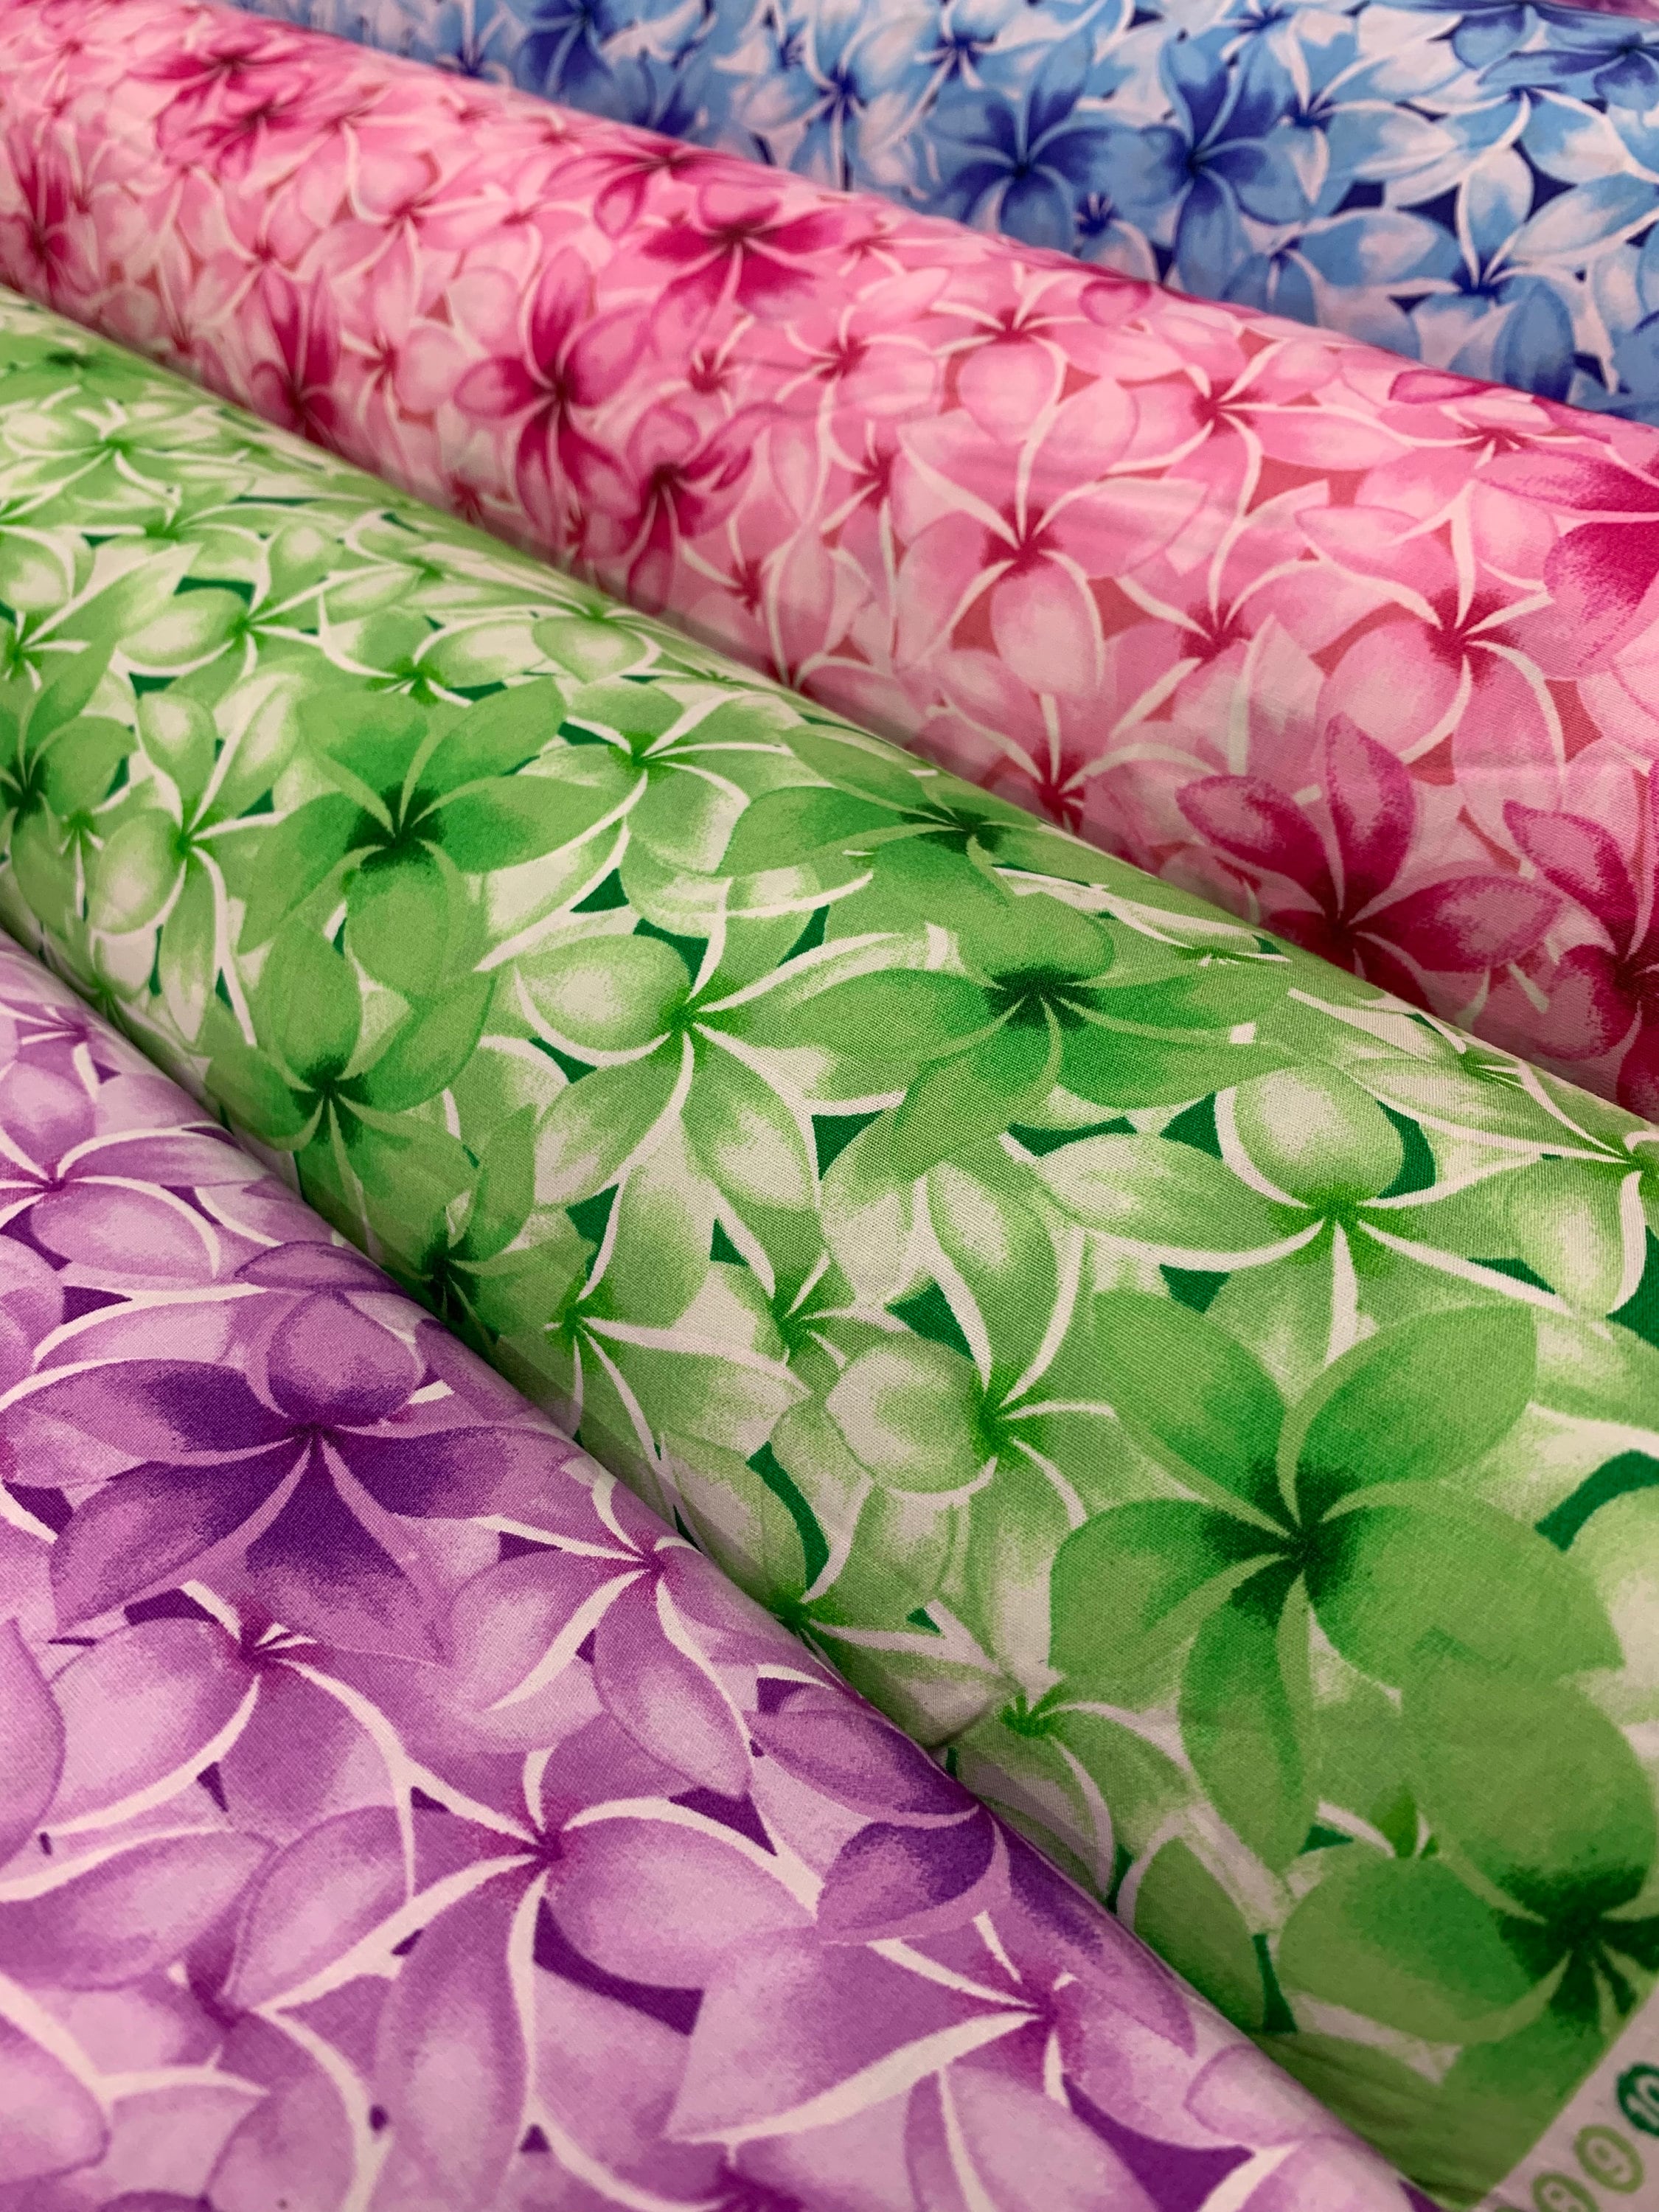 Wholesale Fabric: Tropical Leaf Print Jersey Knit » Fabric